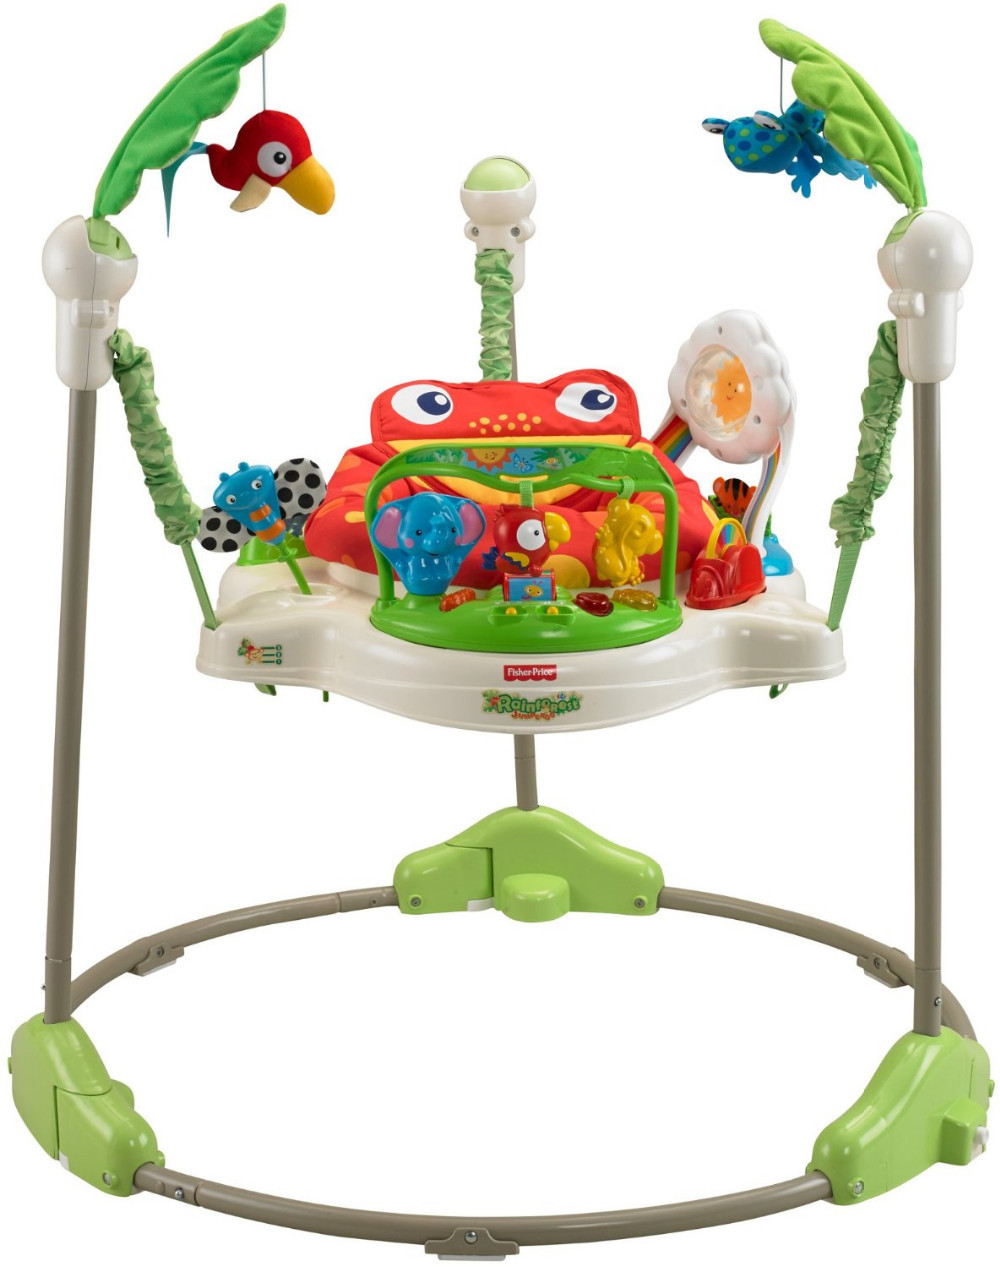 fisher price rainforest jumperoo replacement seat pad